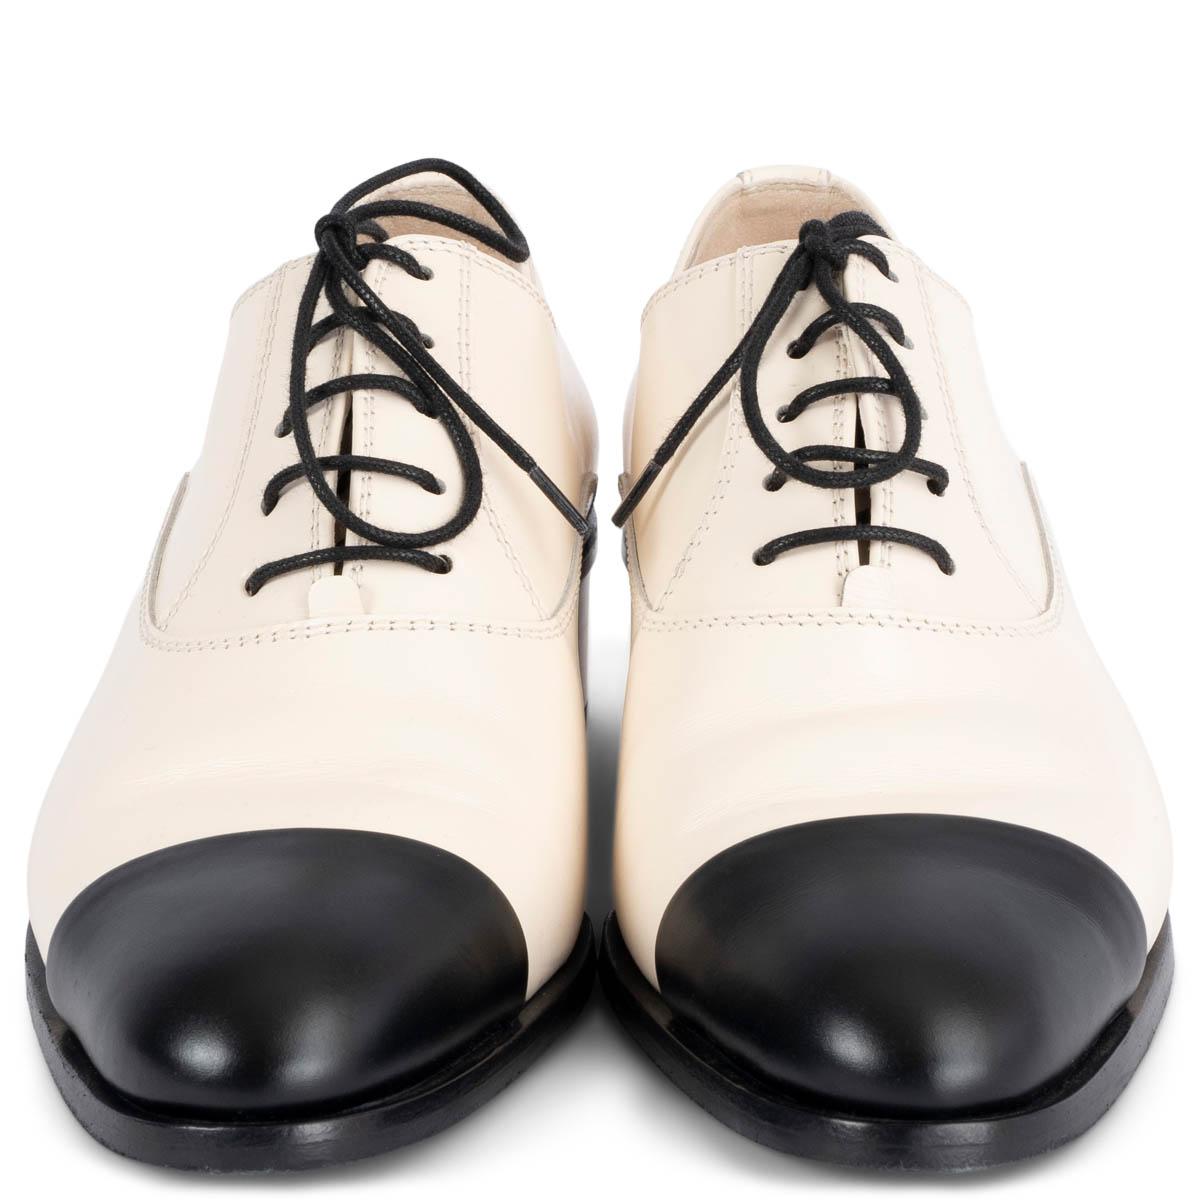 100% authentic Chanel 2022 lace-up block-heel derbies in ivory smooth leather featuring classic black cap-toe. Have been worn once and show some soft dark lines on the heel and on the side of the right shoe. Overall in excellent condition.